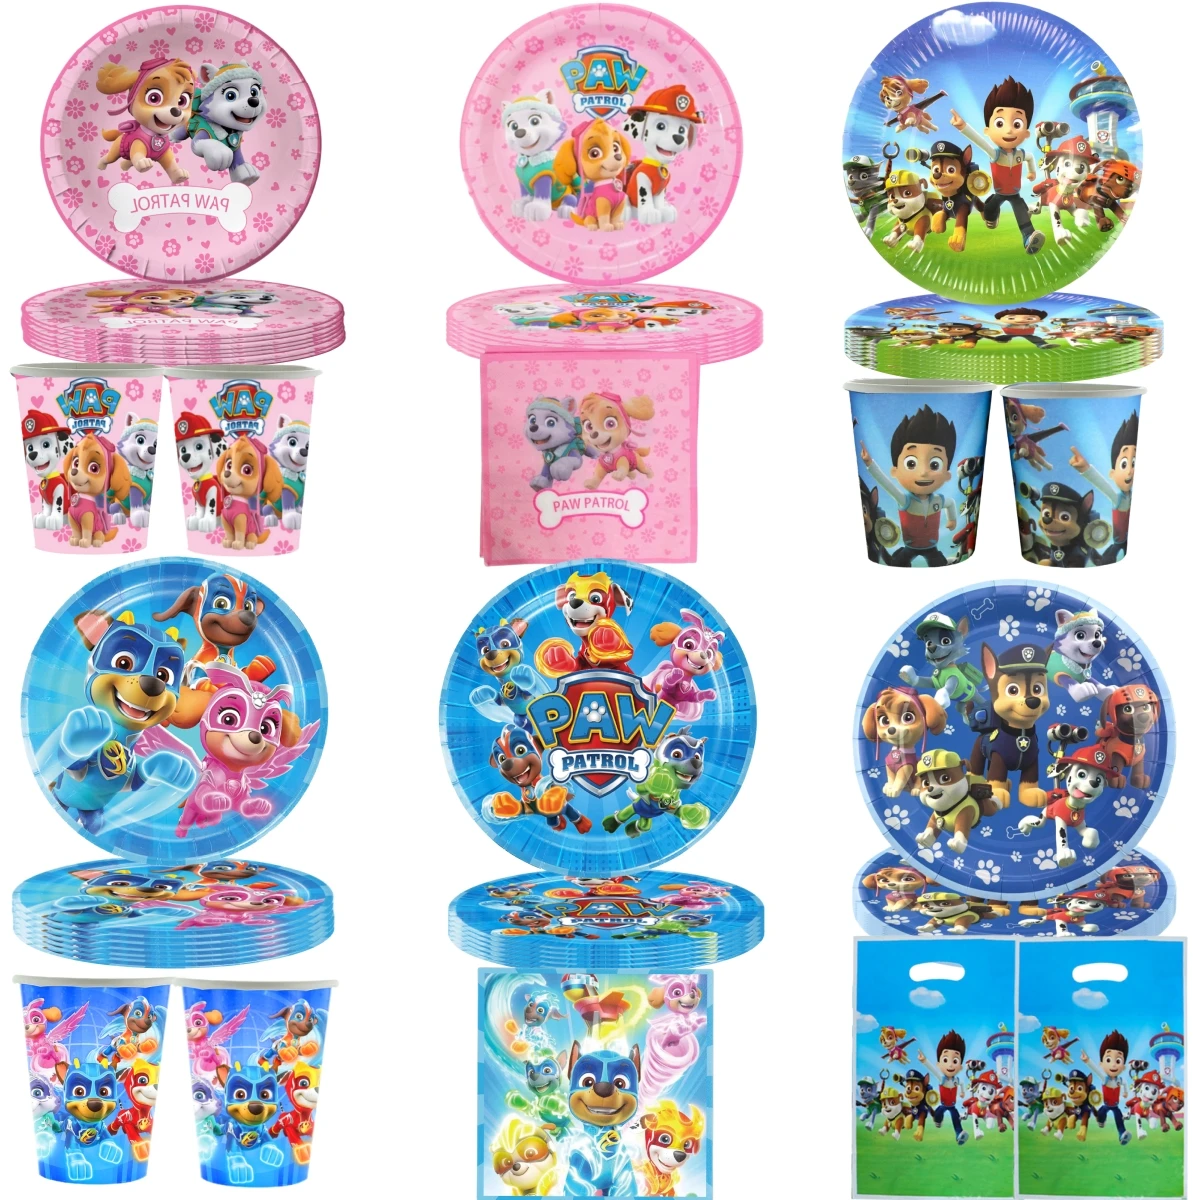 Paw Patrol Birthday Party Decor Disposable Tableware Tablecloth Cup Plate Napkin Dog Gift Bag Baby Shower Kid DIY Party Supplies animal crossing theme 41pcs lot birthday party disposable decorations supplies baby shower tableware cup plate napkin tablecloth